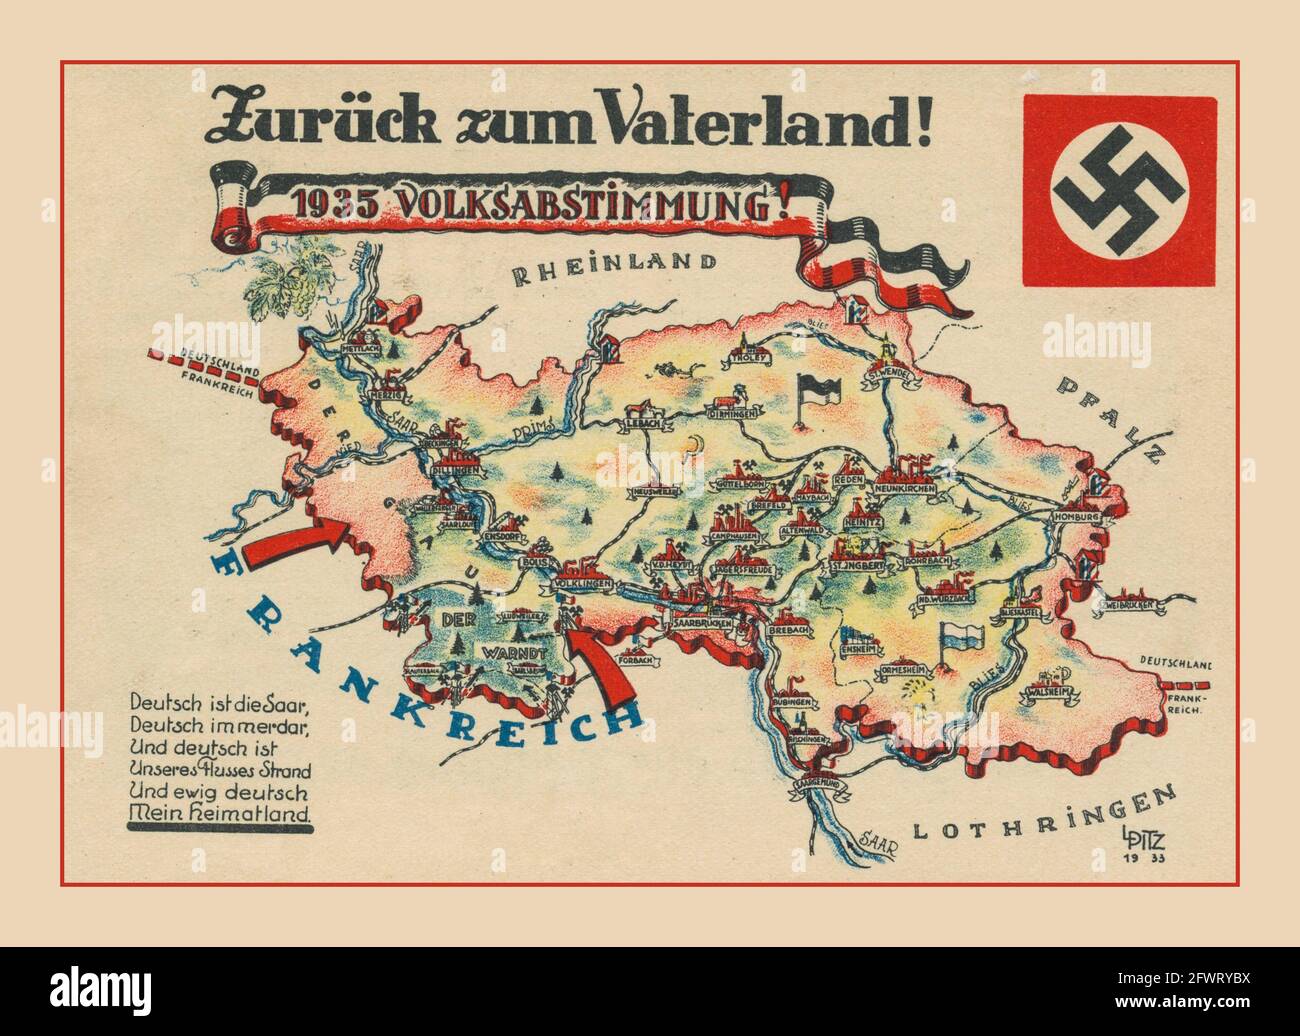 Nazi Germany vintage 'Back to the Fatherland'  '1935 REFERENDUM' Saar referendum plebiscite, 1935, propaganda card for the Saar plebiscite, a card with a map of Saarland and a coloured propaganda card sent by post in the Saar area in 1935  'Germany is the Saar Germany forever' Stock Photo